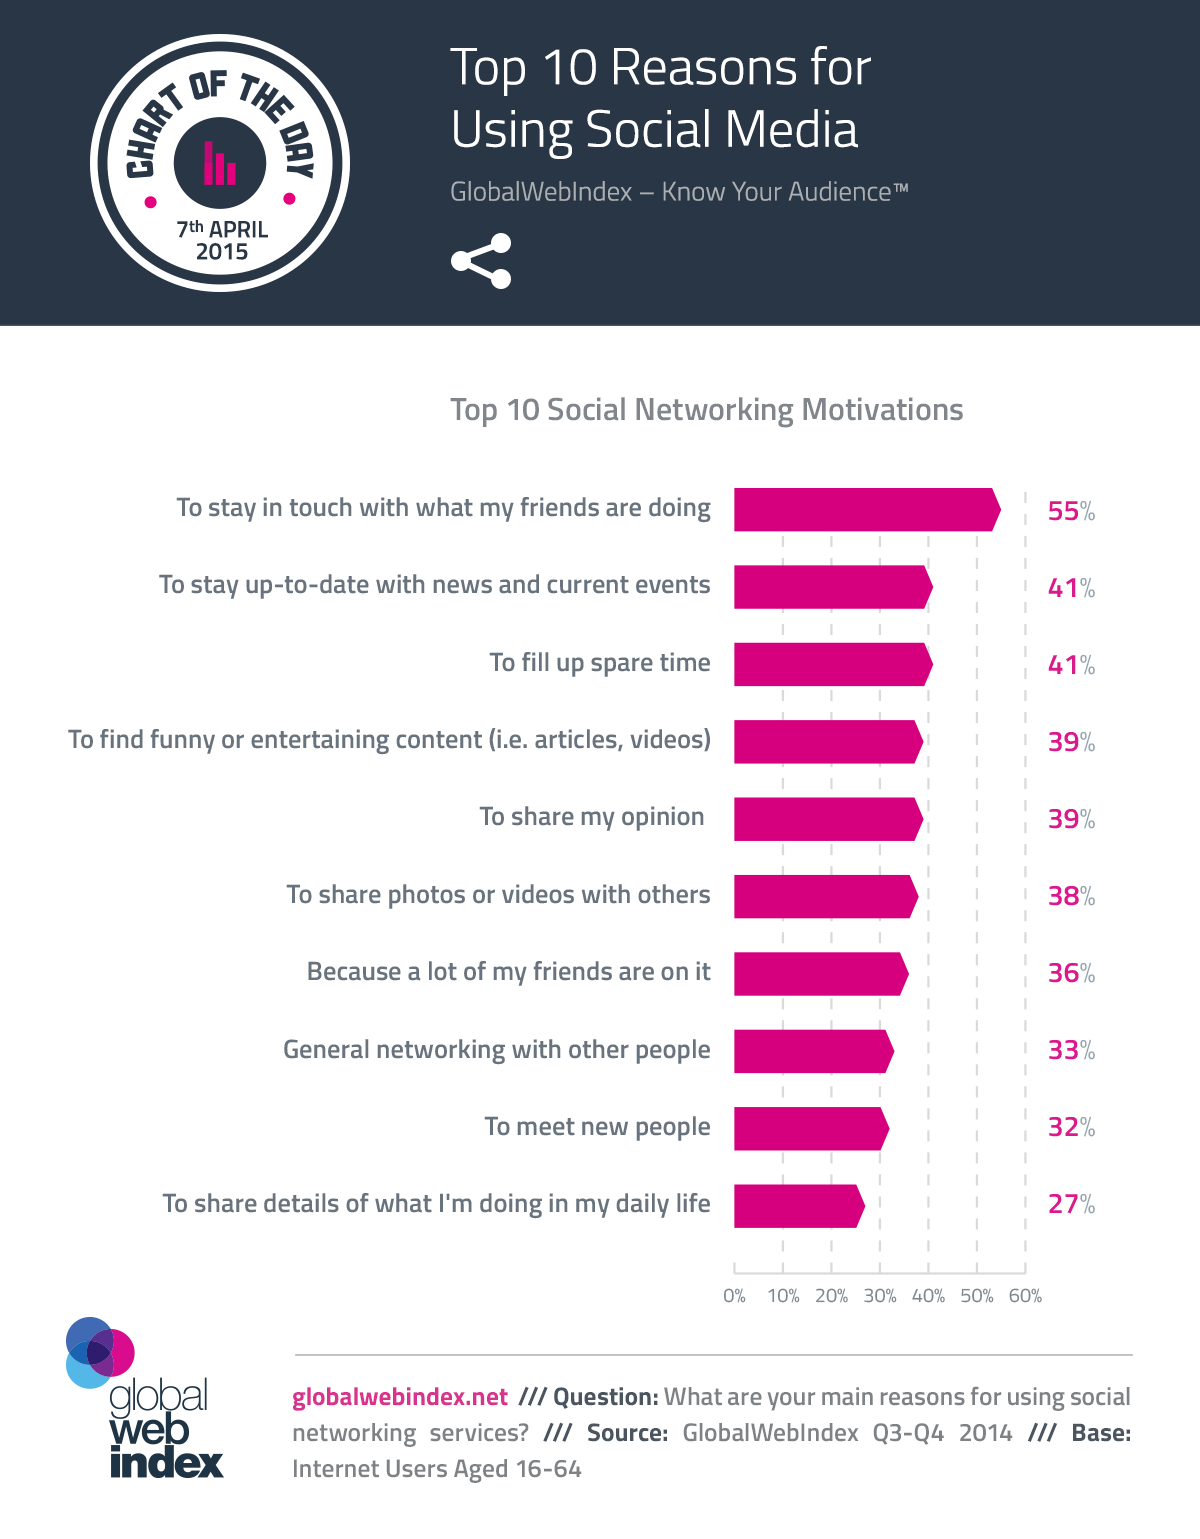 Top 10 Reasons for Using #SocialMedia - #infographic